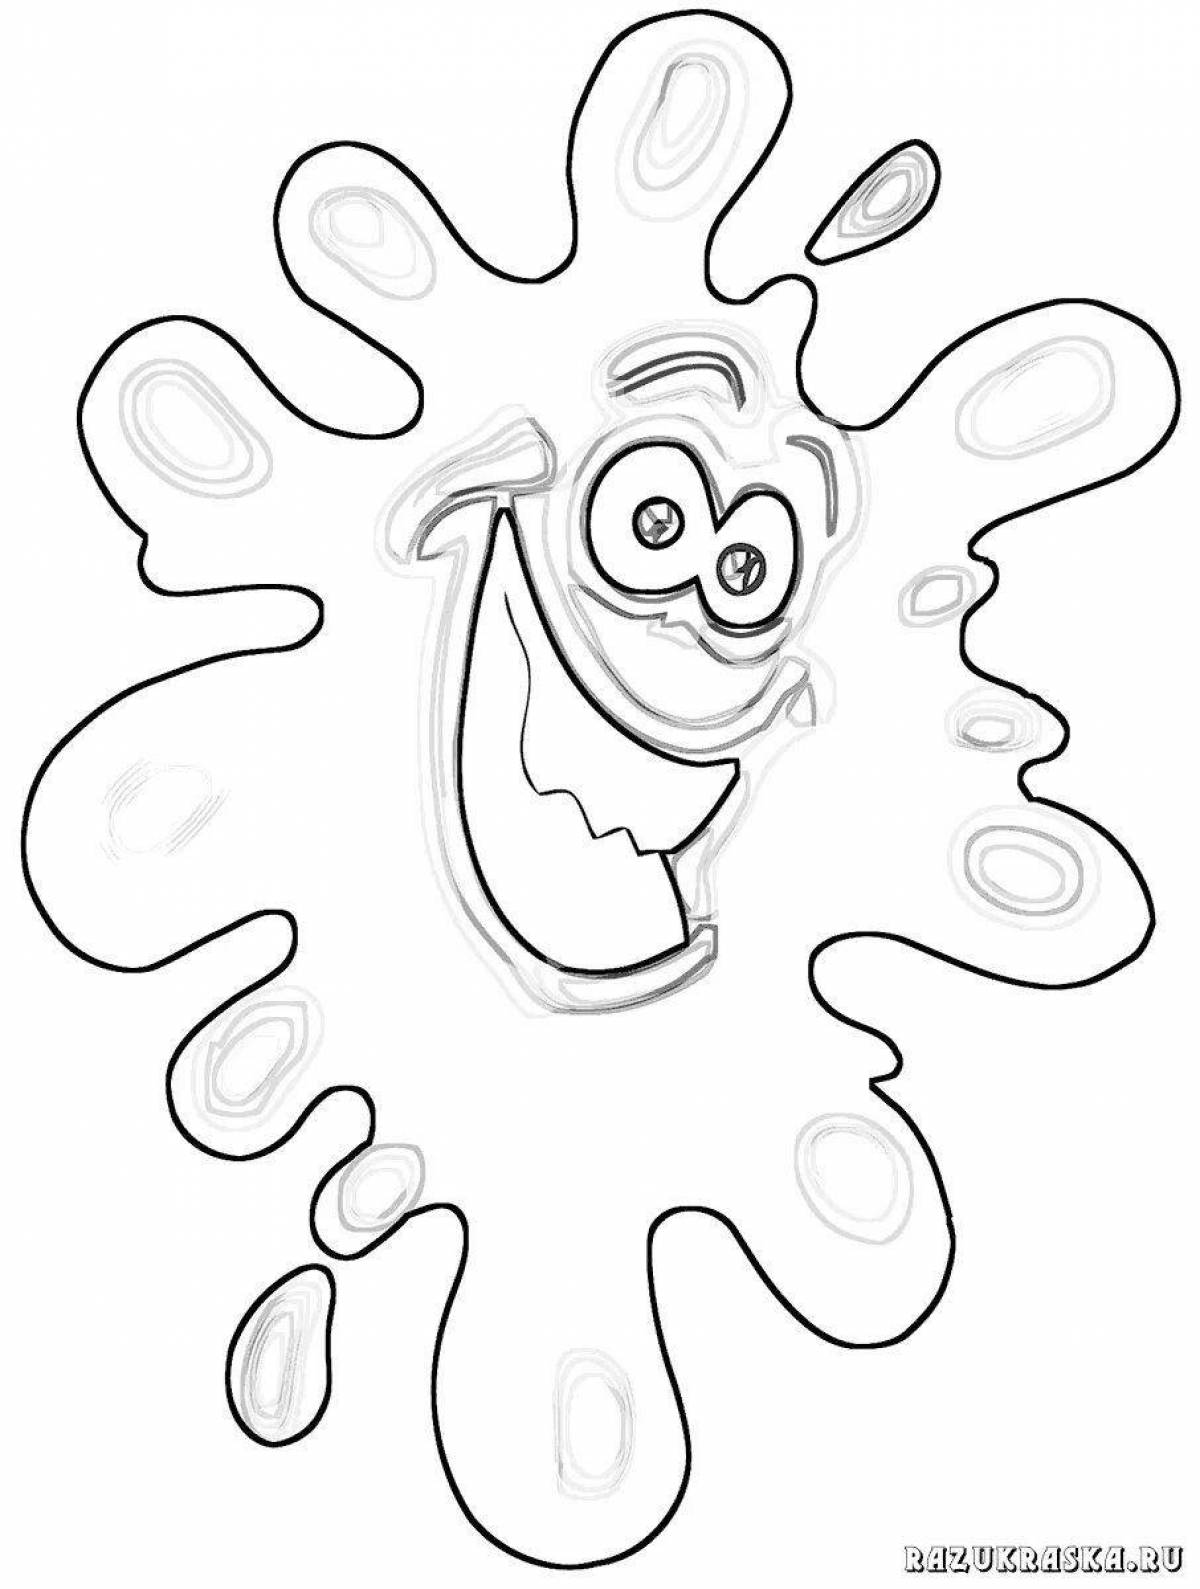 Colorful spot coloring page for kids